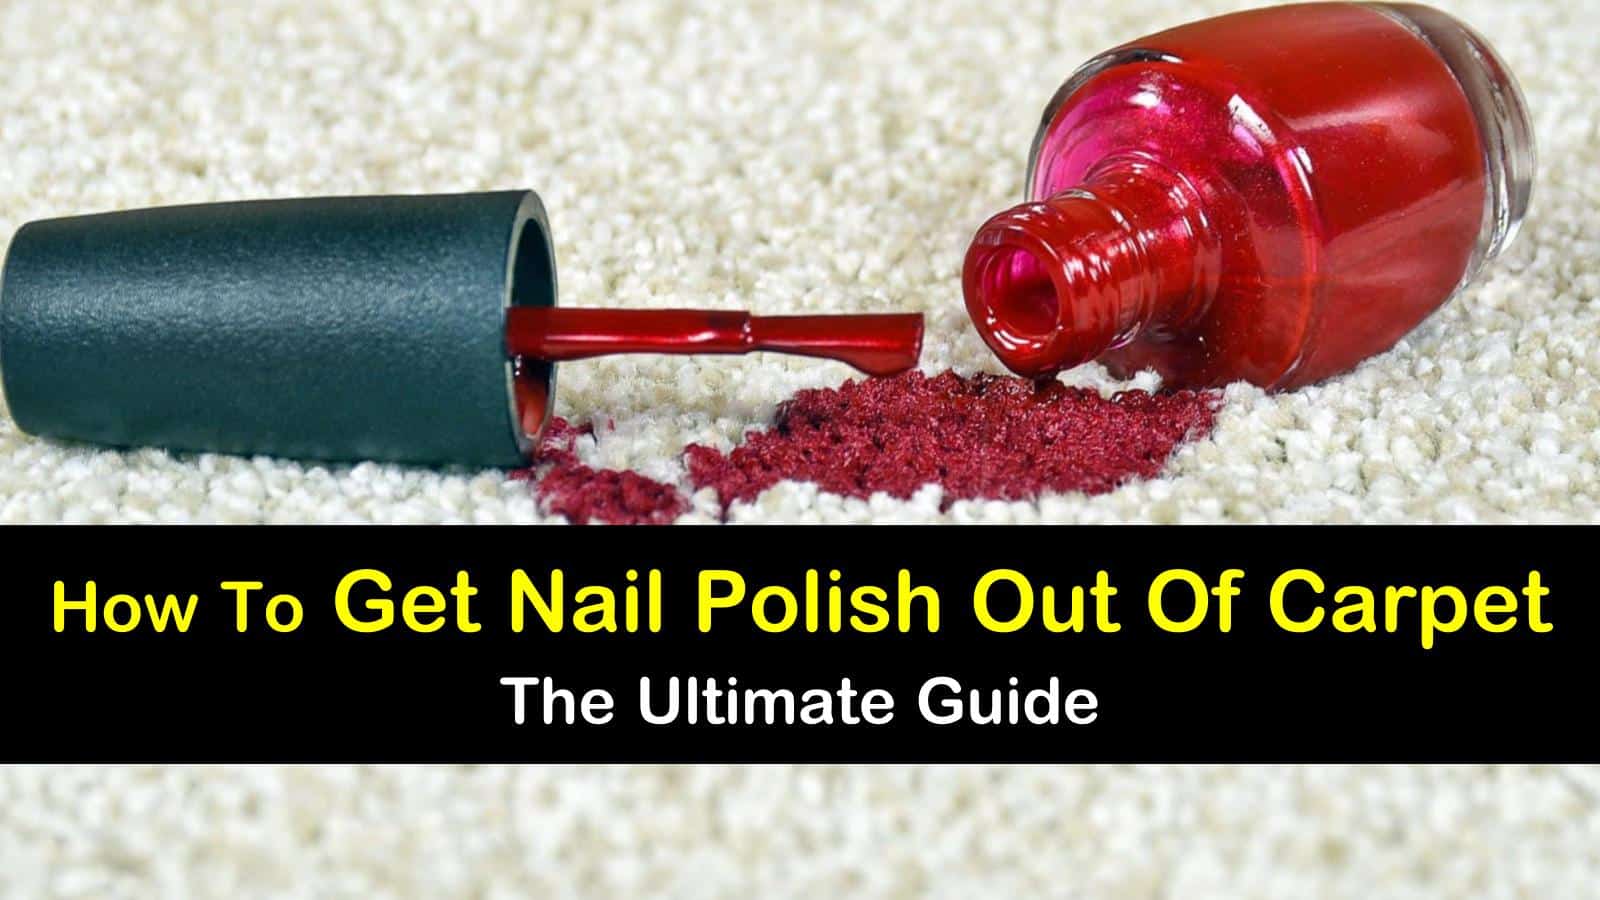 how to get nail polish out of carpet titleimg1